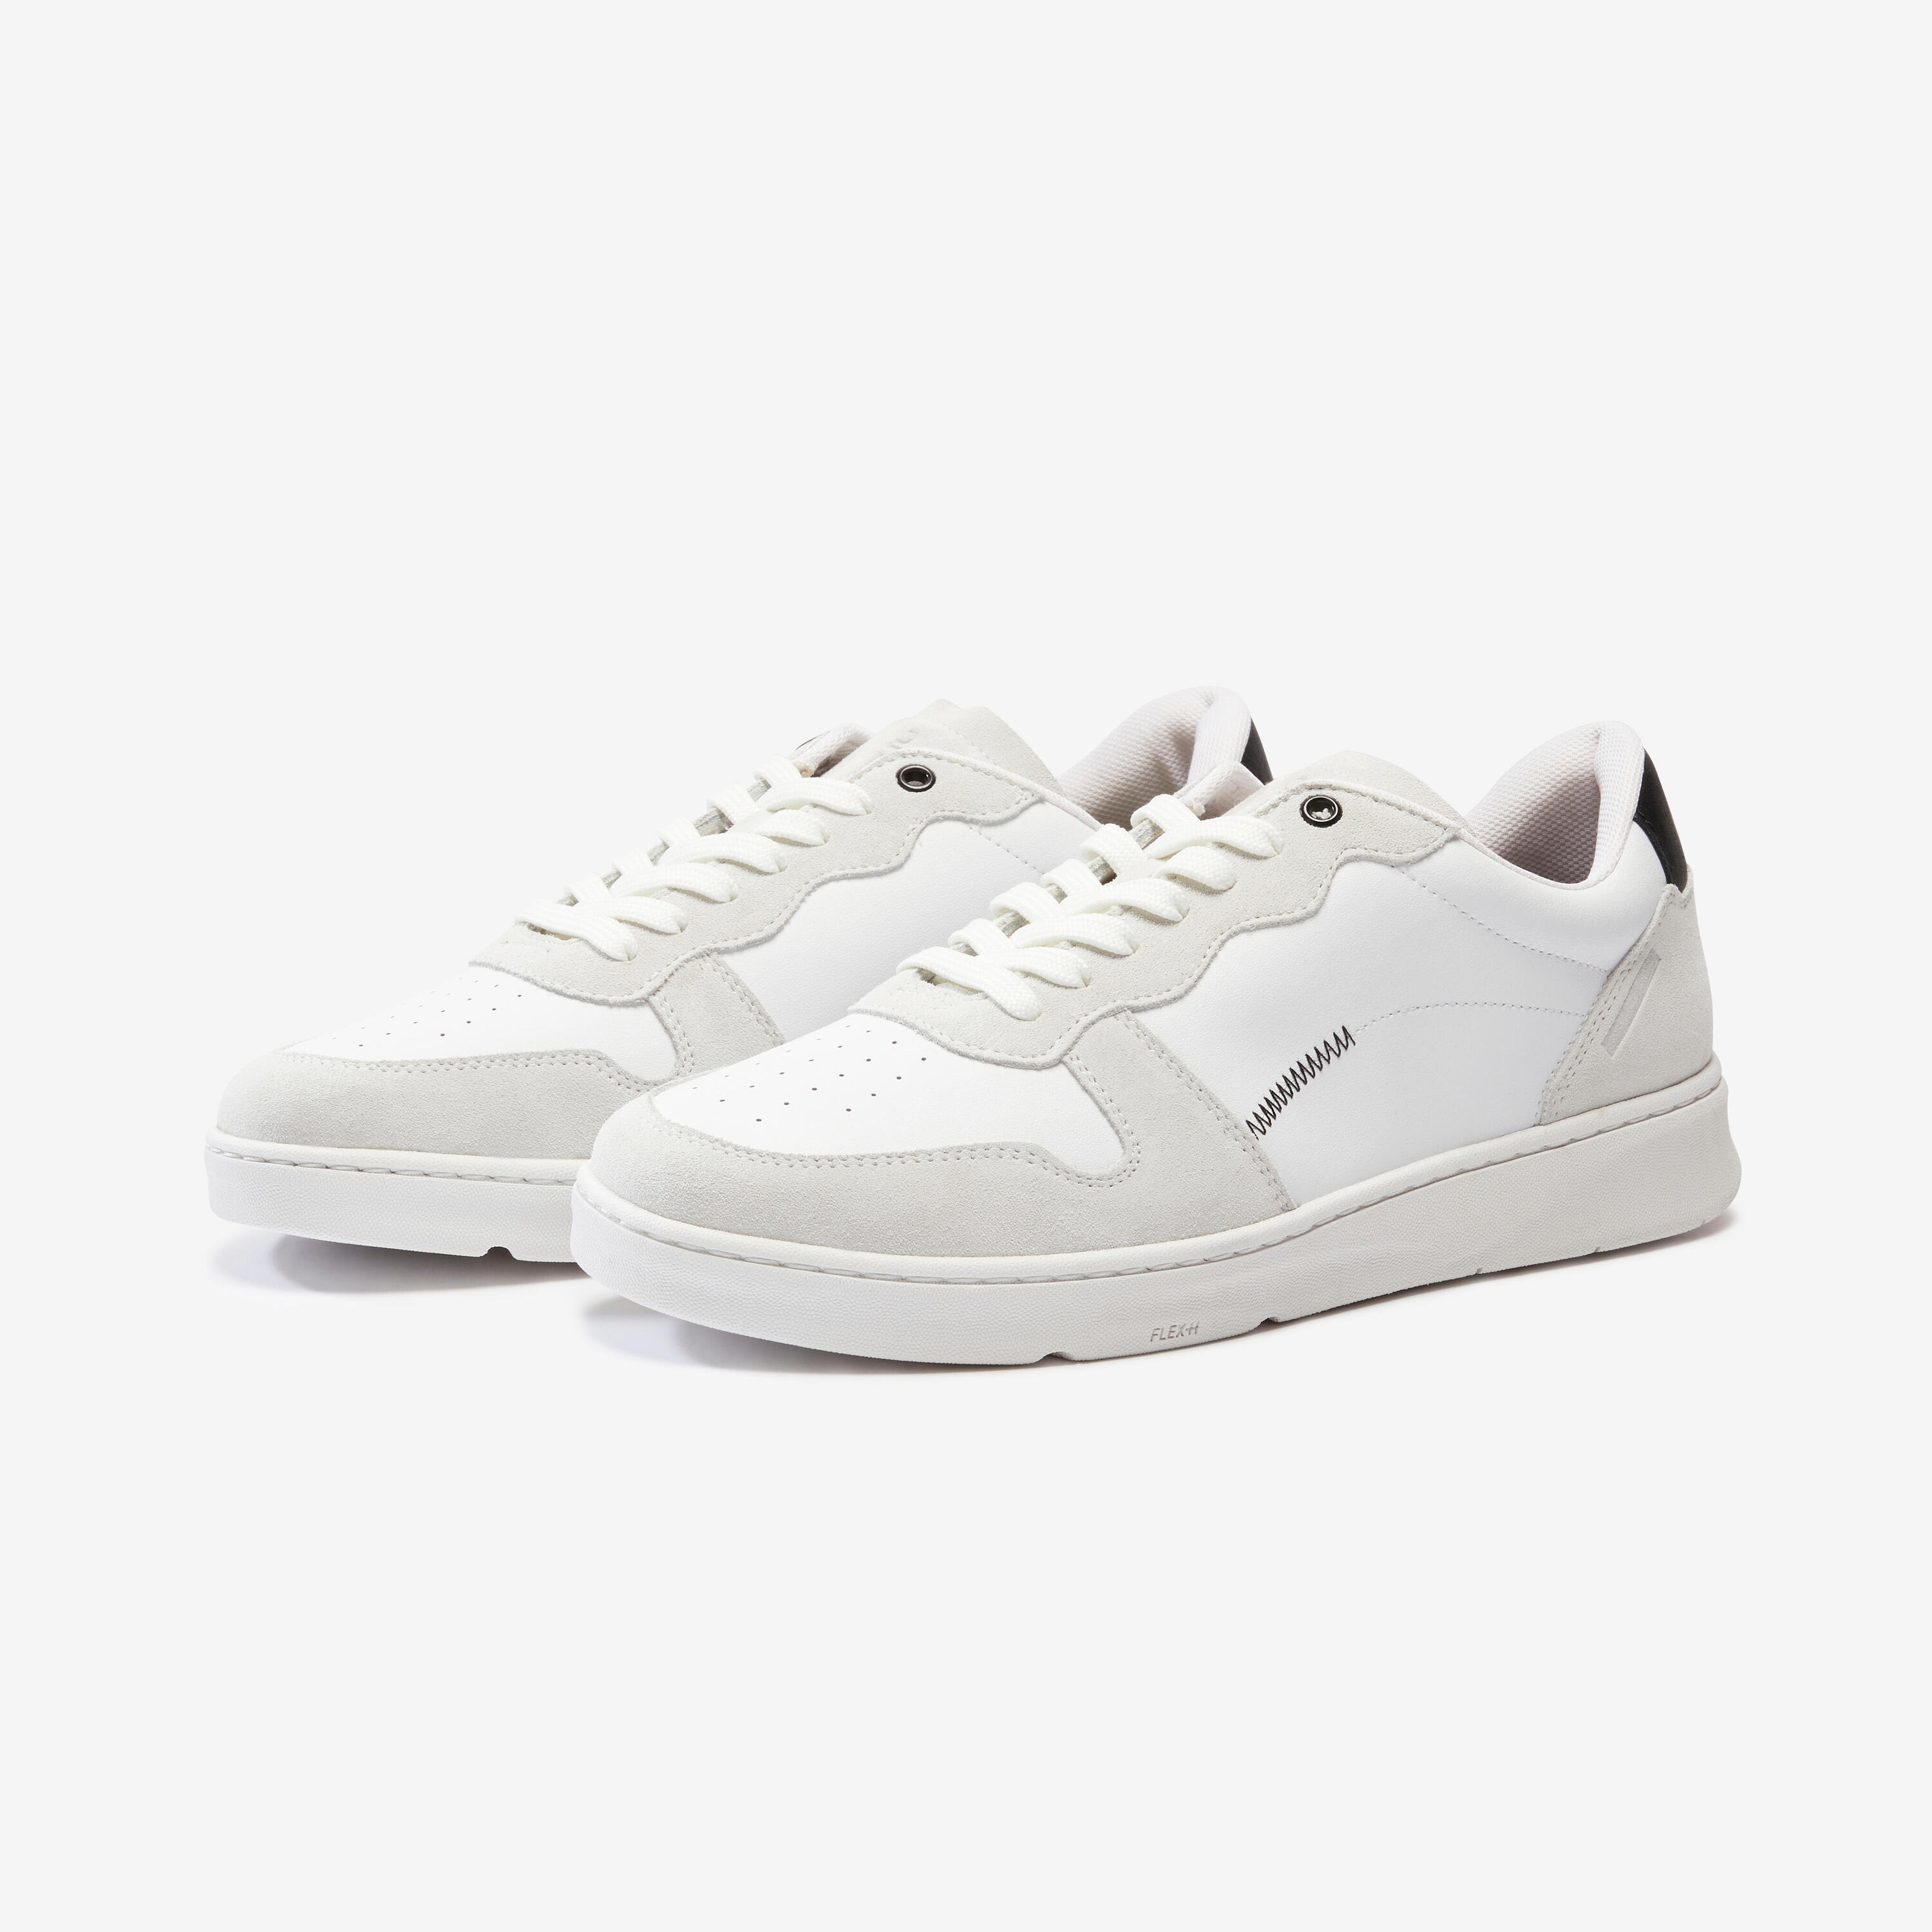 MEN'S WALK PROTECT LEATHER TRAINERS - WHITE 2/8